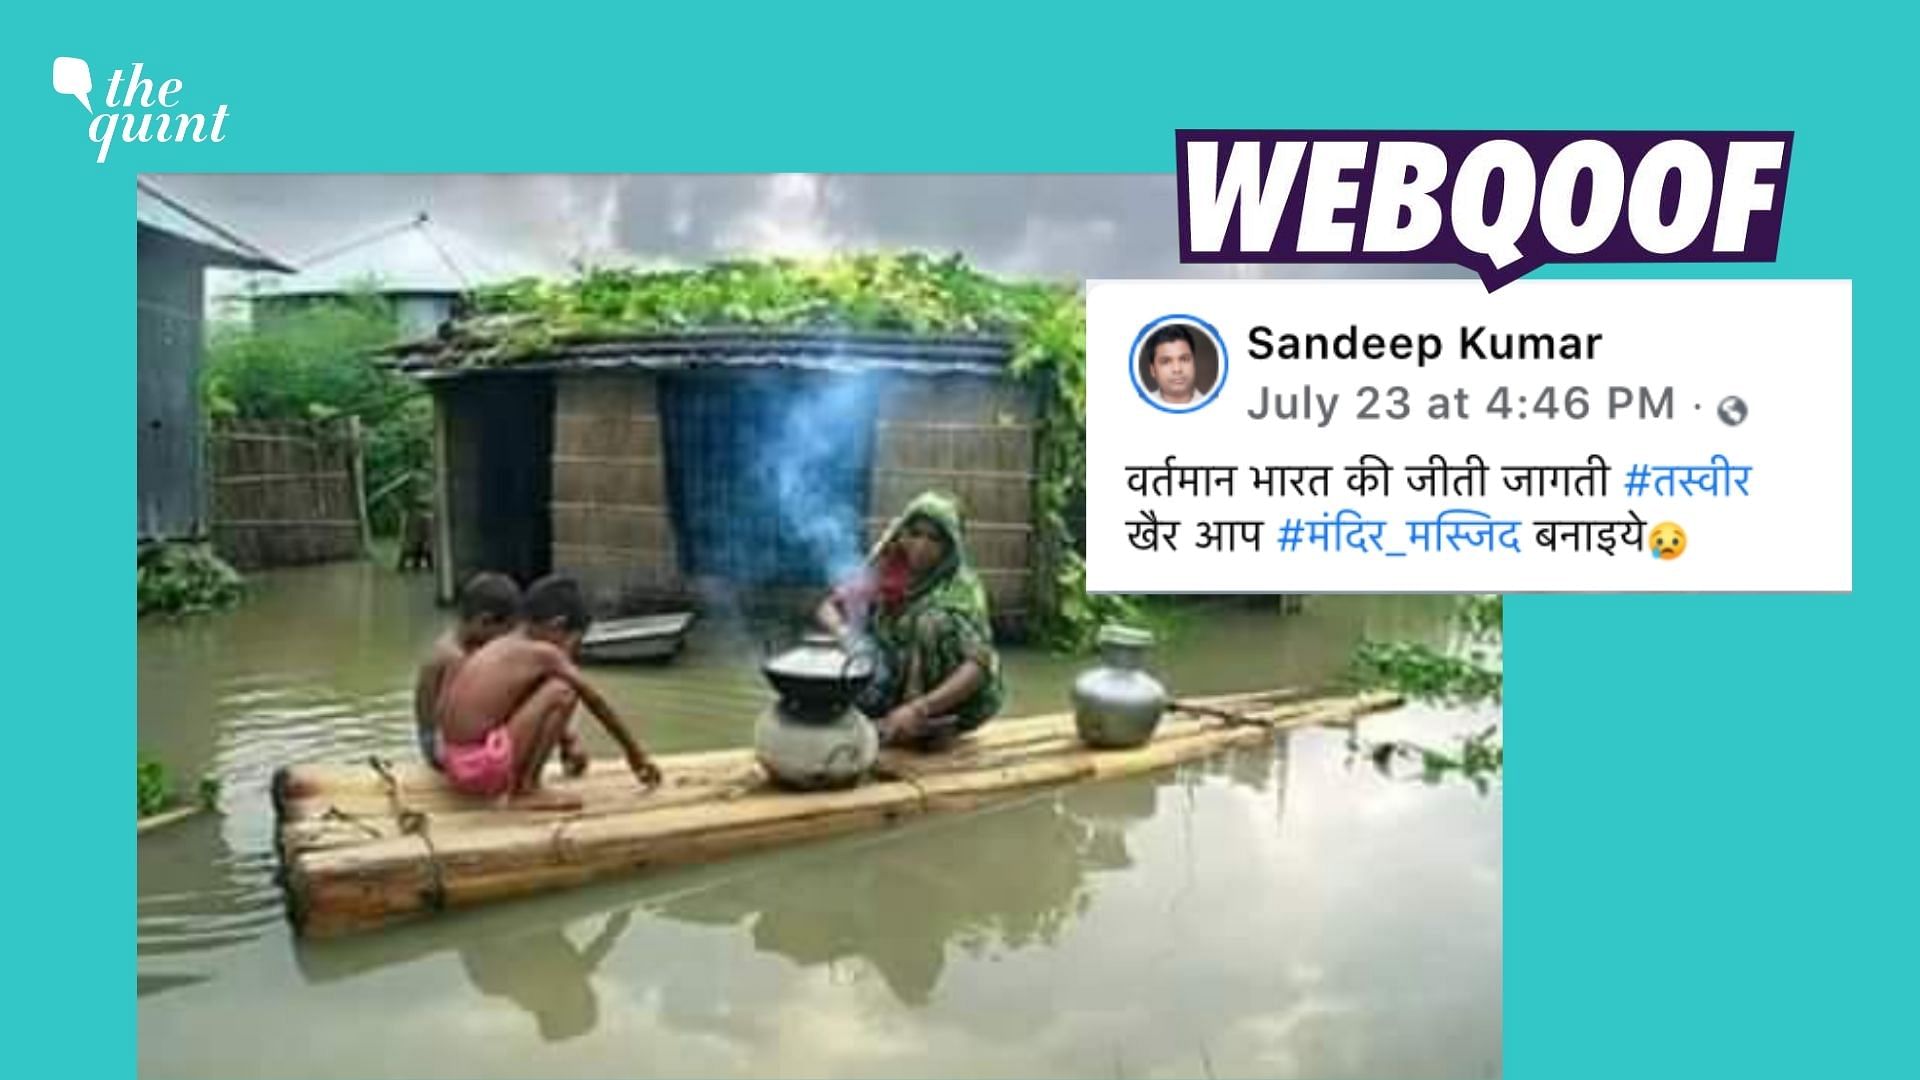 <div class="paragraphs"><p>An old image showing flood situation in Bangladesh was used to falsely claim that it's a recent visual from India.</p></div>